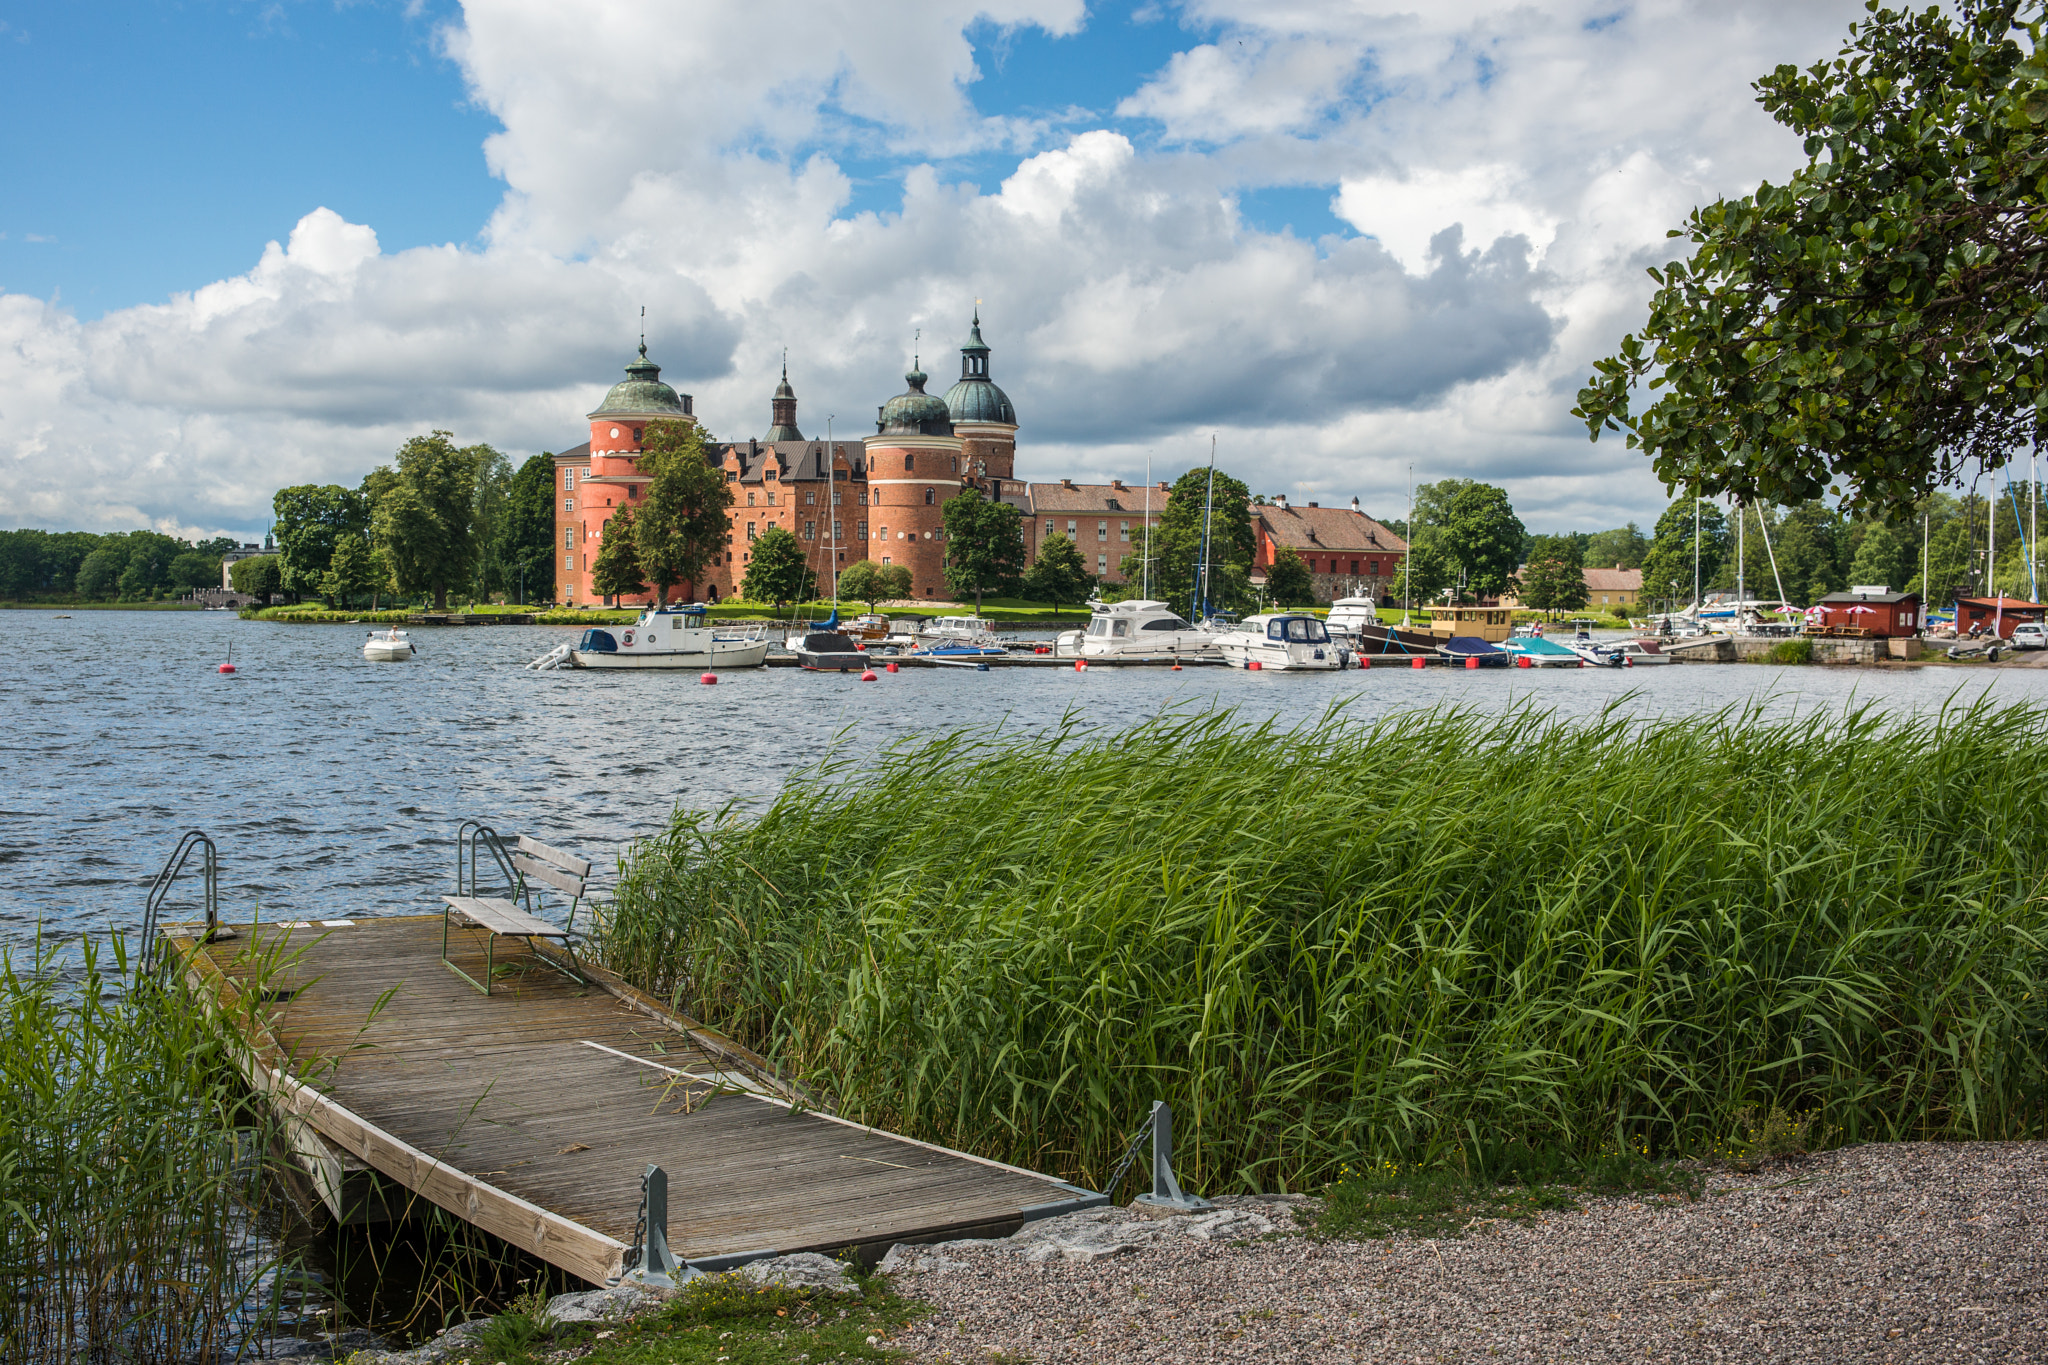 Sony a99 II sample photo. Schloss gripsholm, mariefred, sweden photography